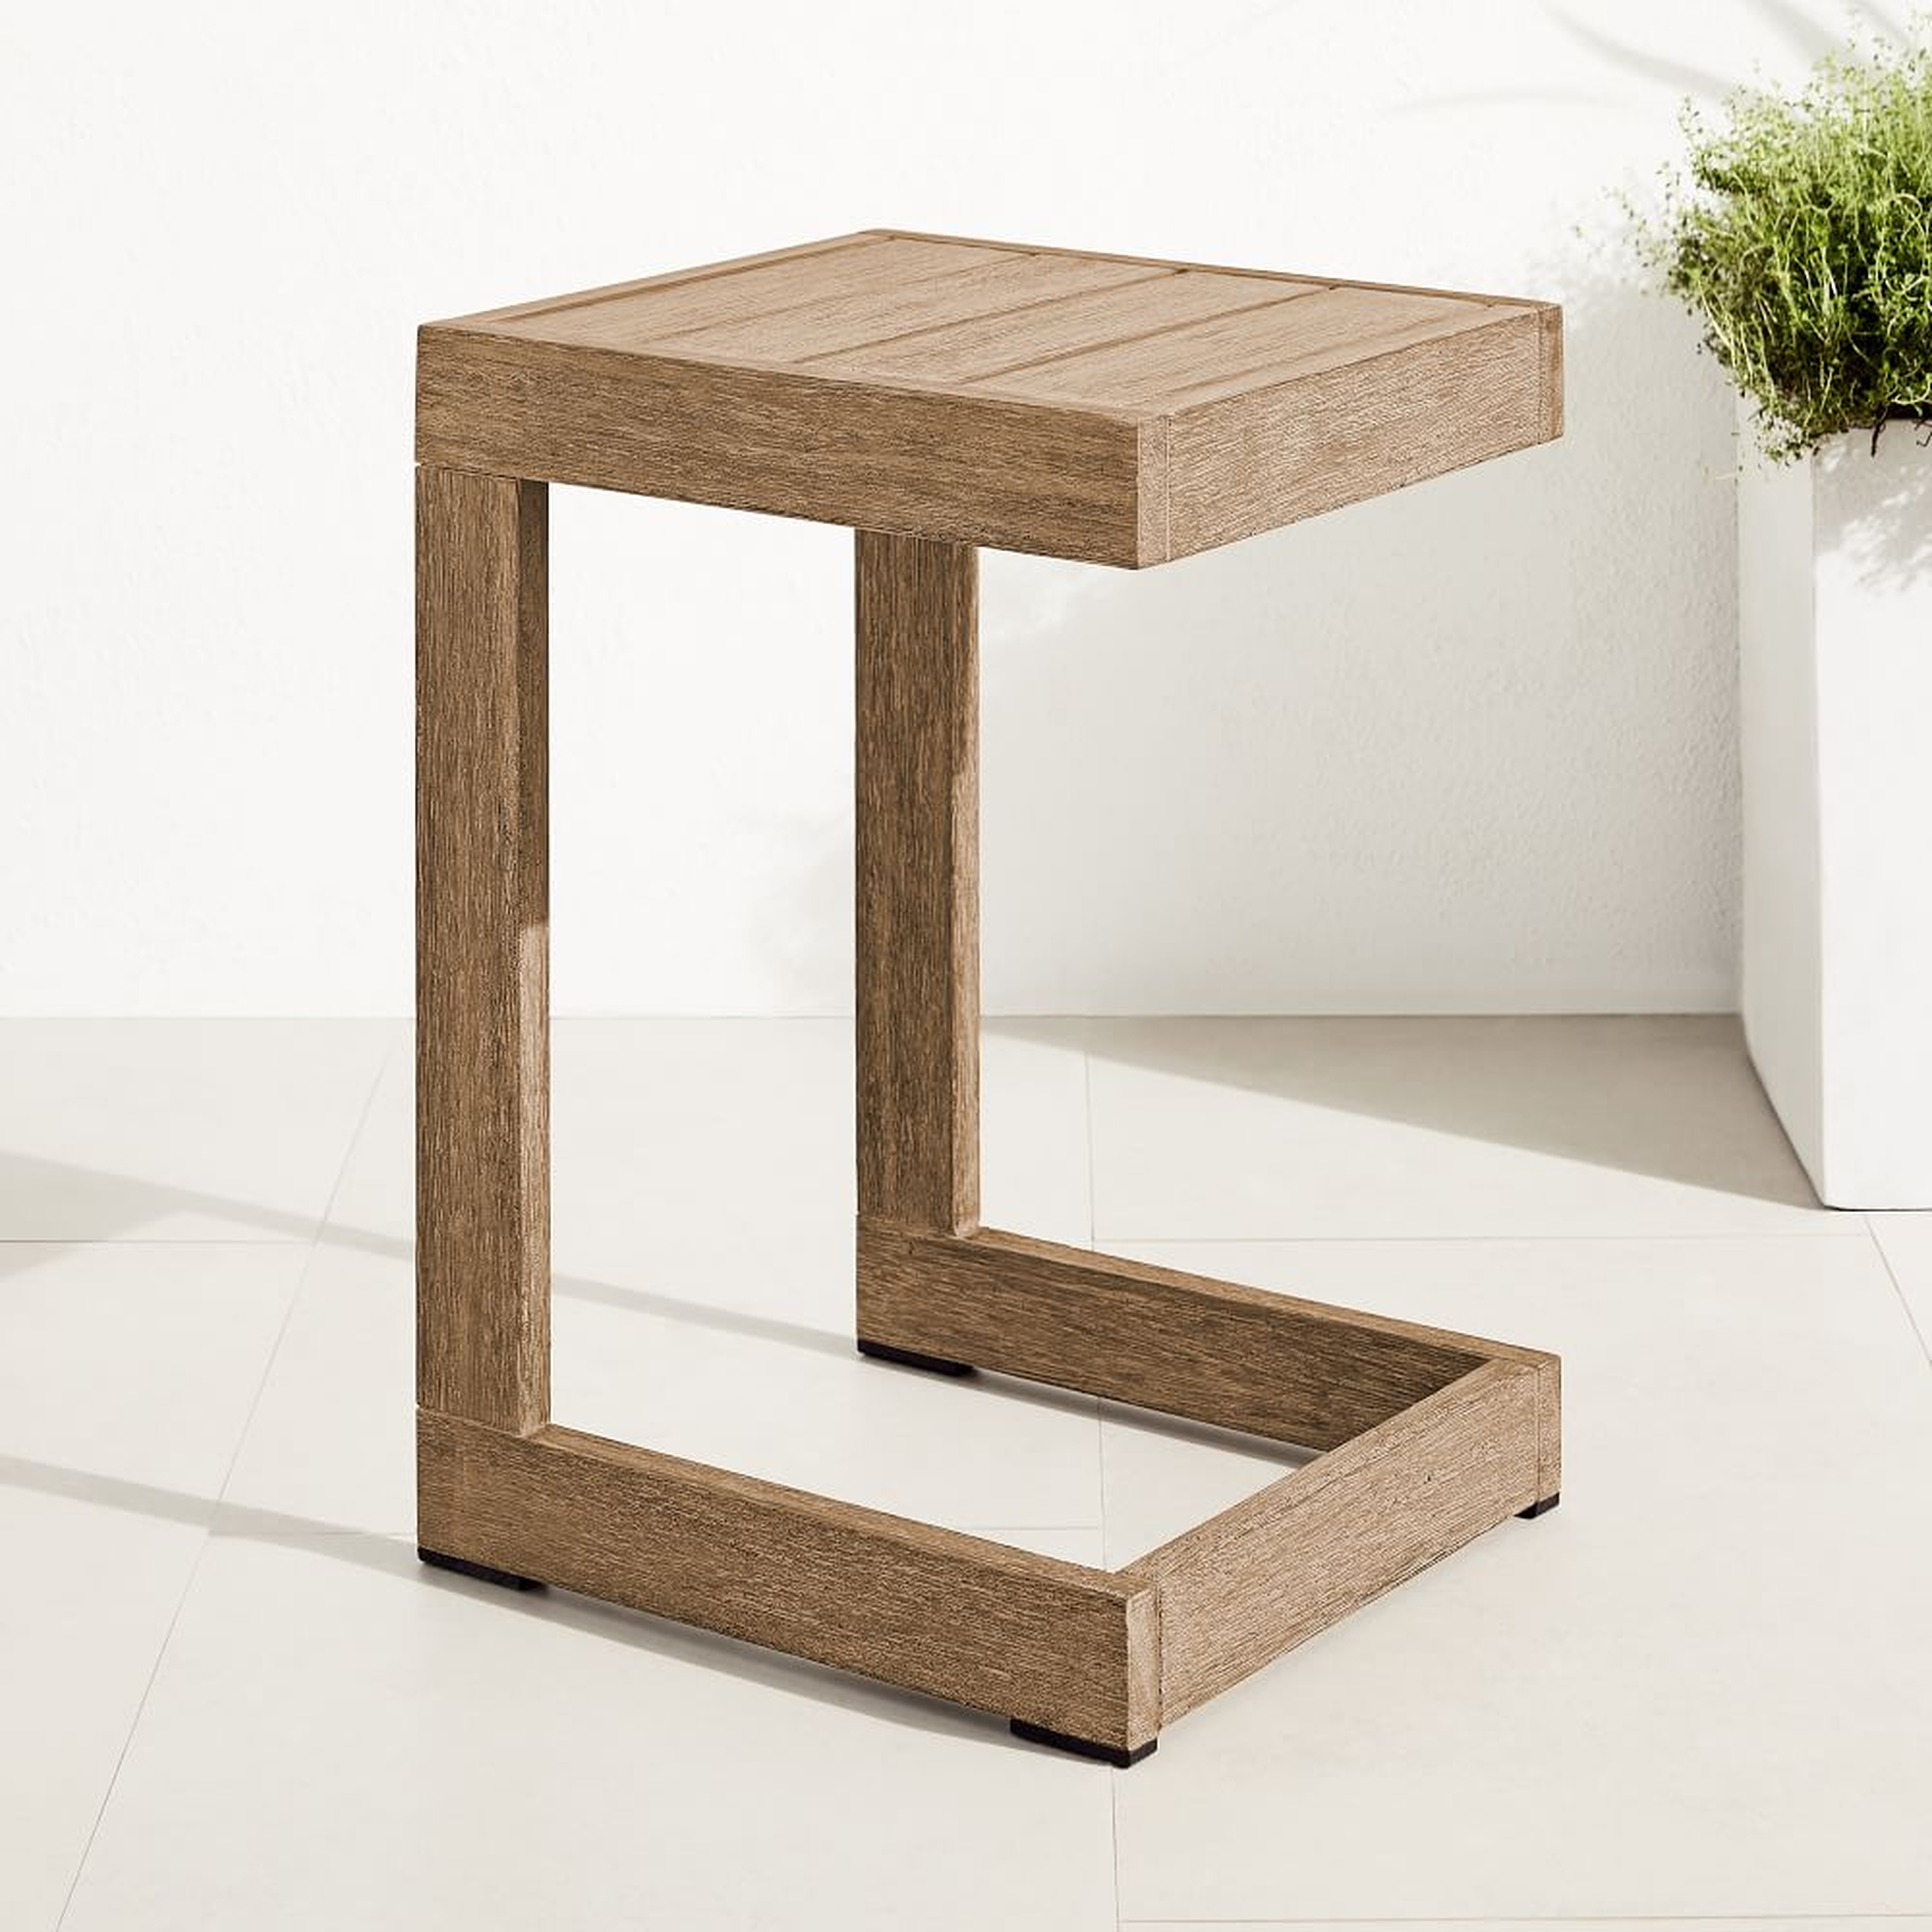 Portside Outdoor C-Shaped Side Table, Driftwood - West Elm